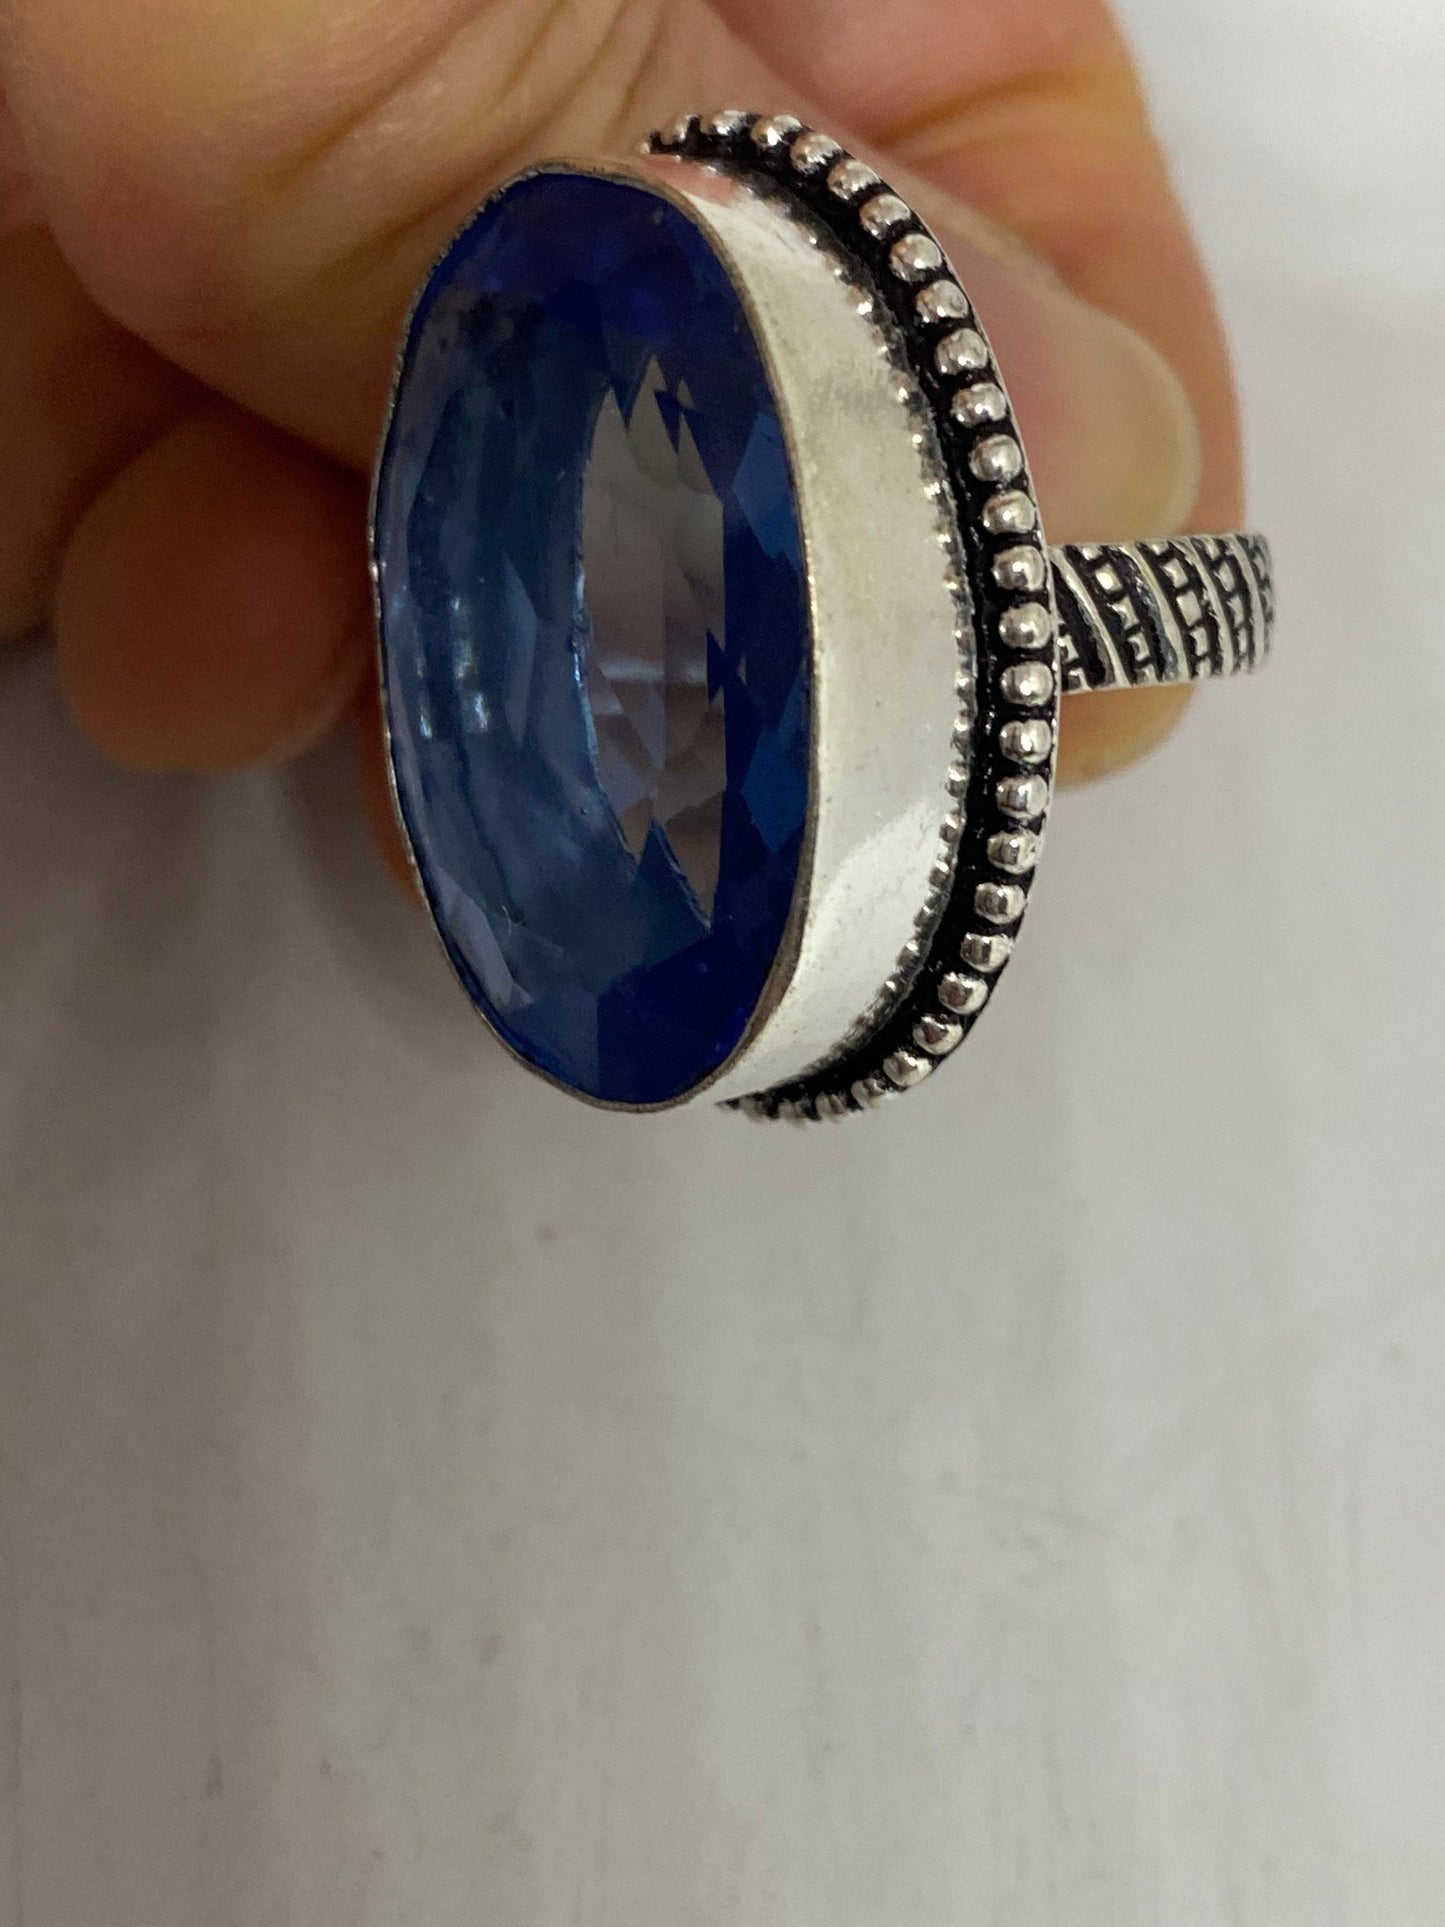 Vintage Blue Vintage Art Glass Ring About 1 Inch Long Knuckle Ring